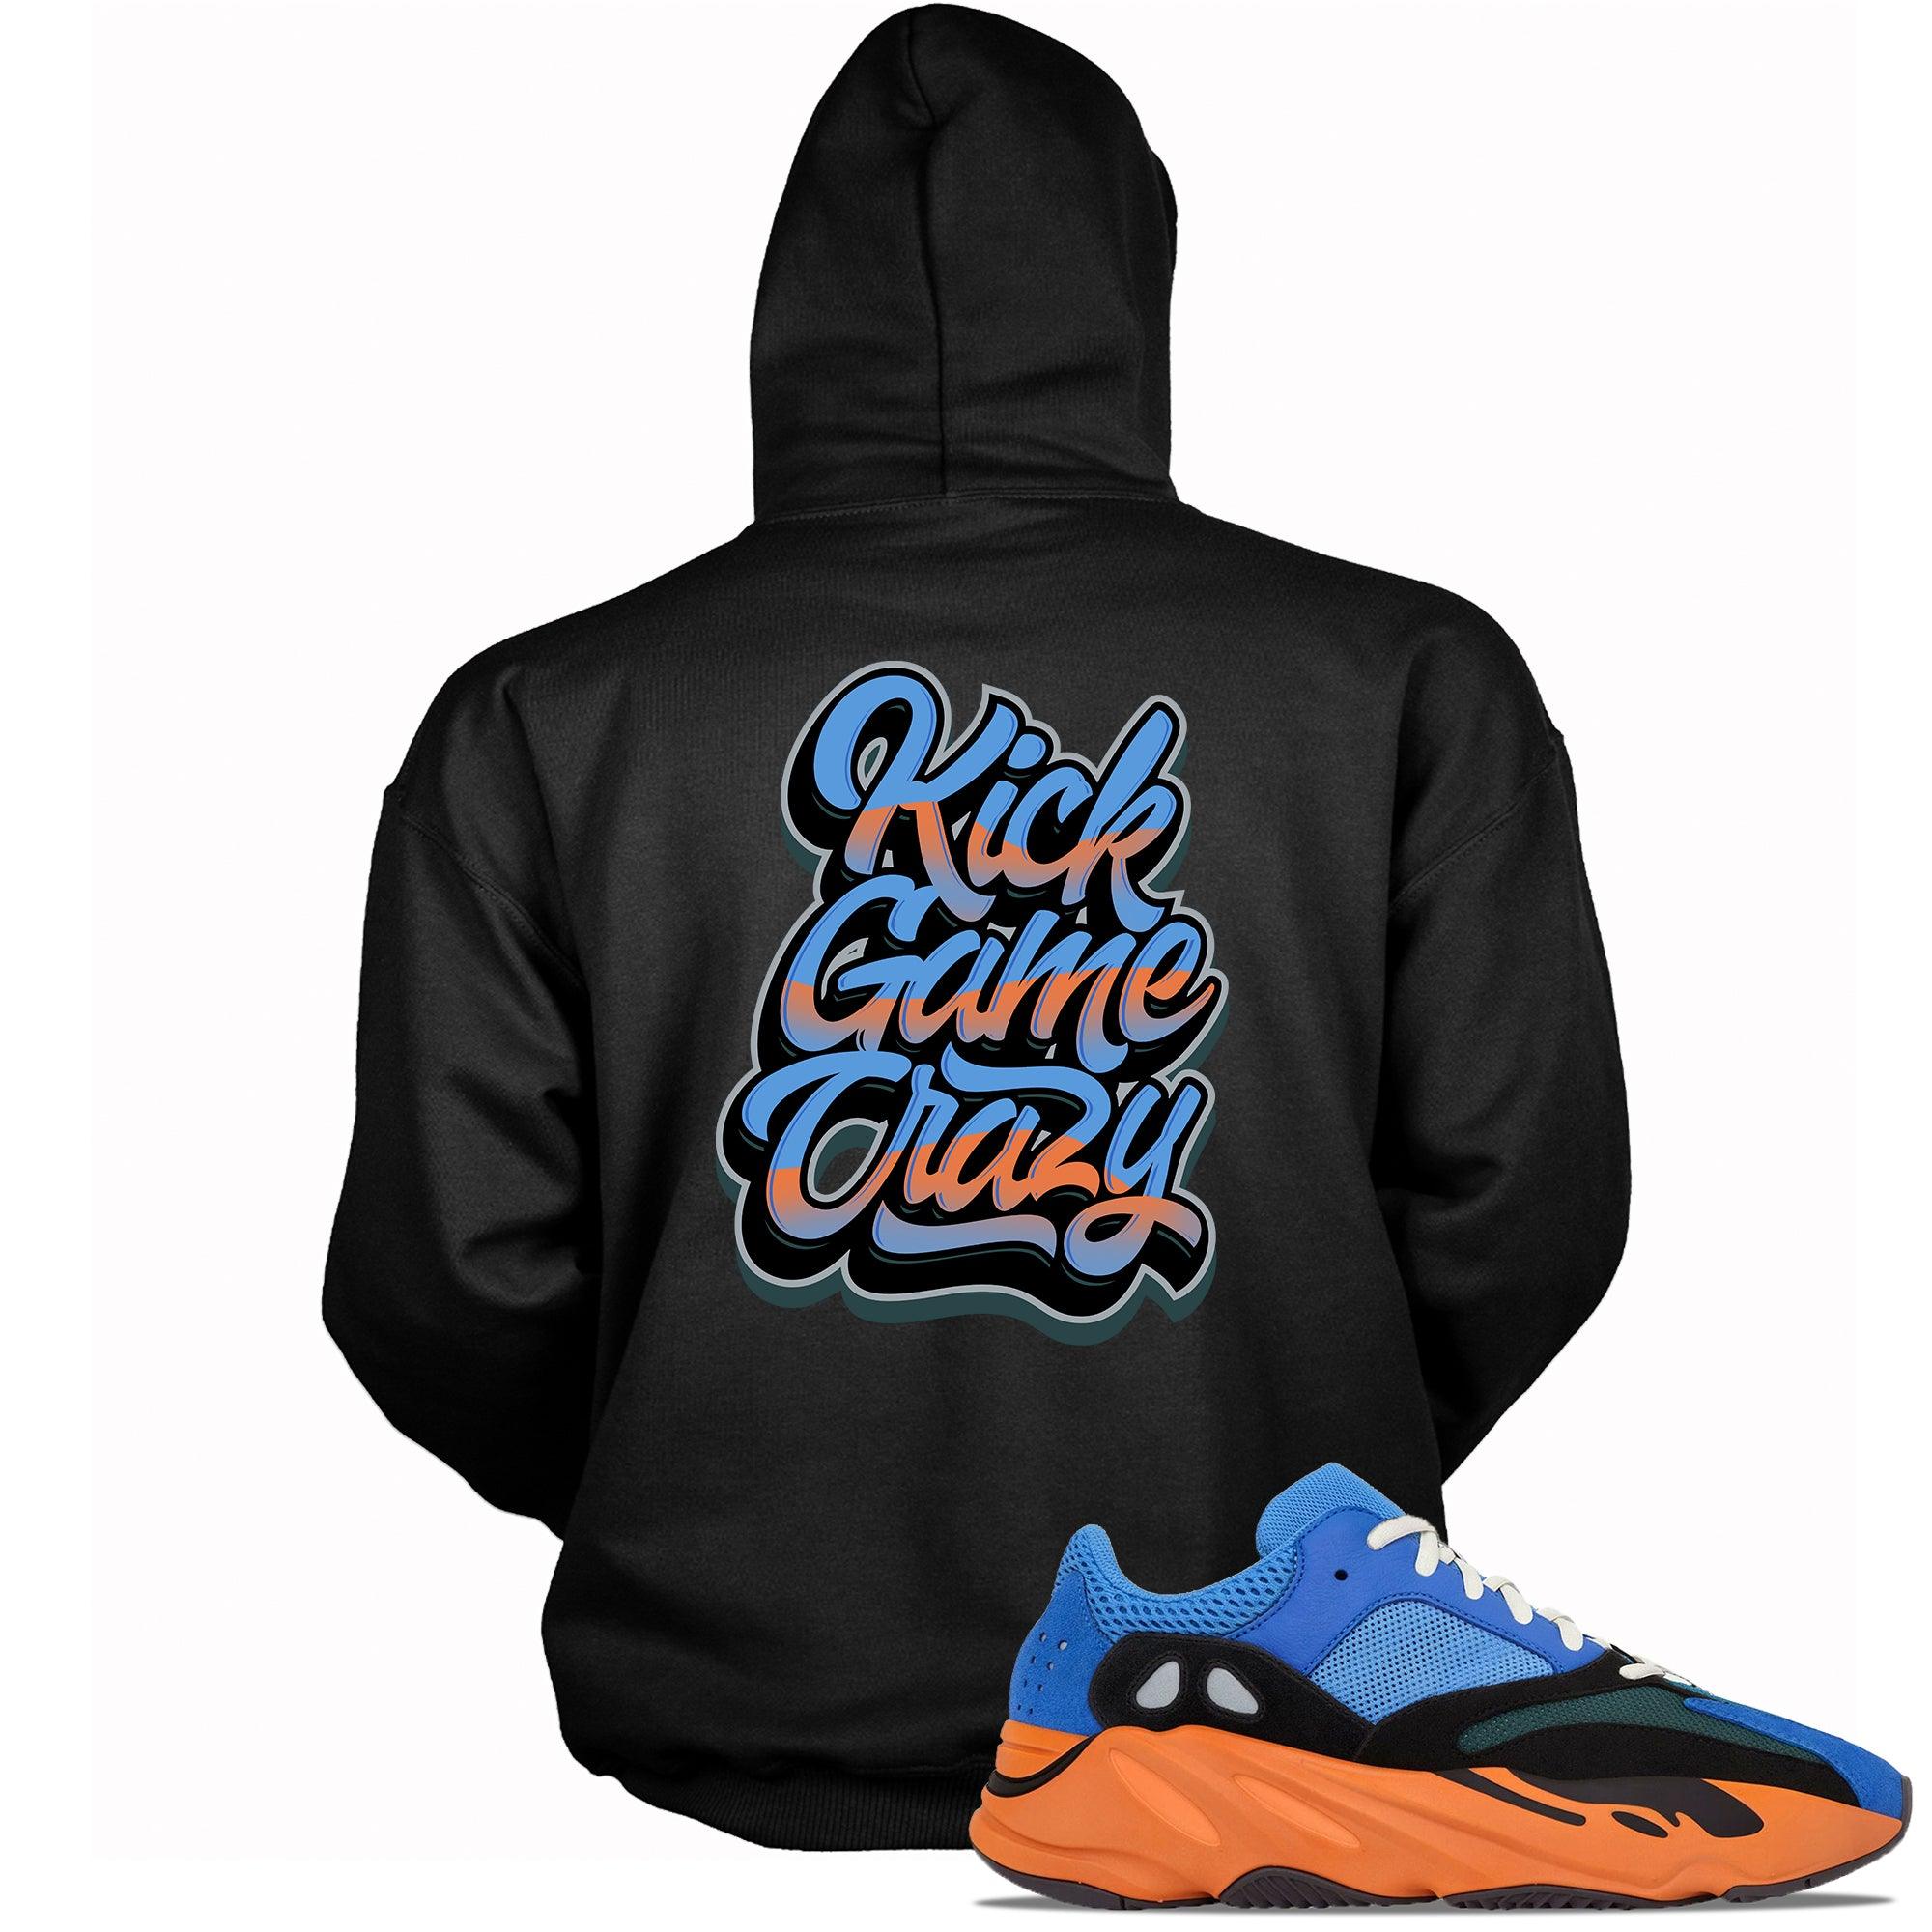 Kick Game Crazy Hoodie Yeezy Boost 700s Bright Blue photo